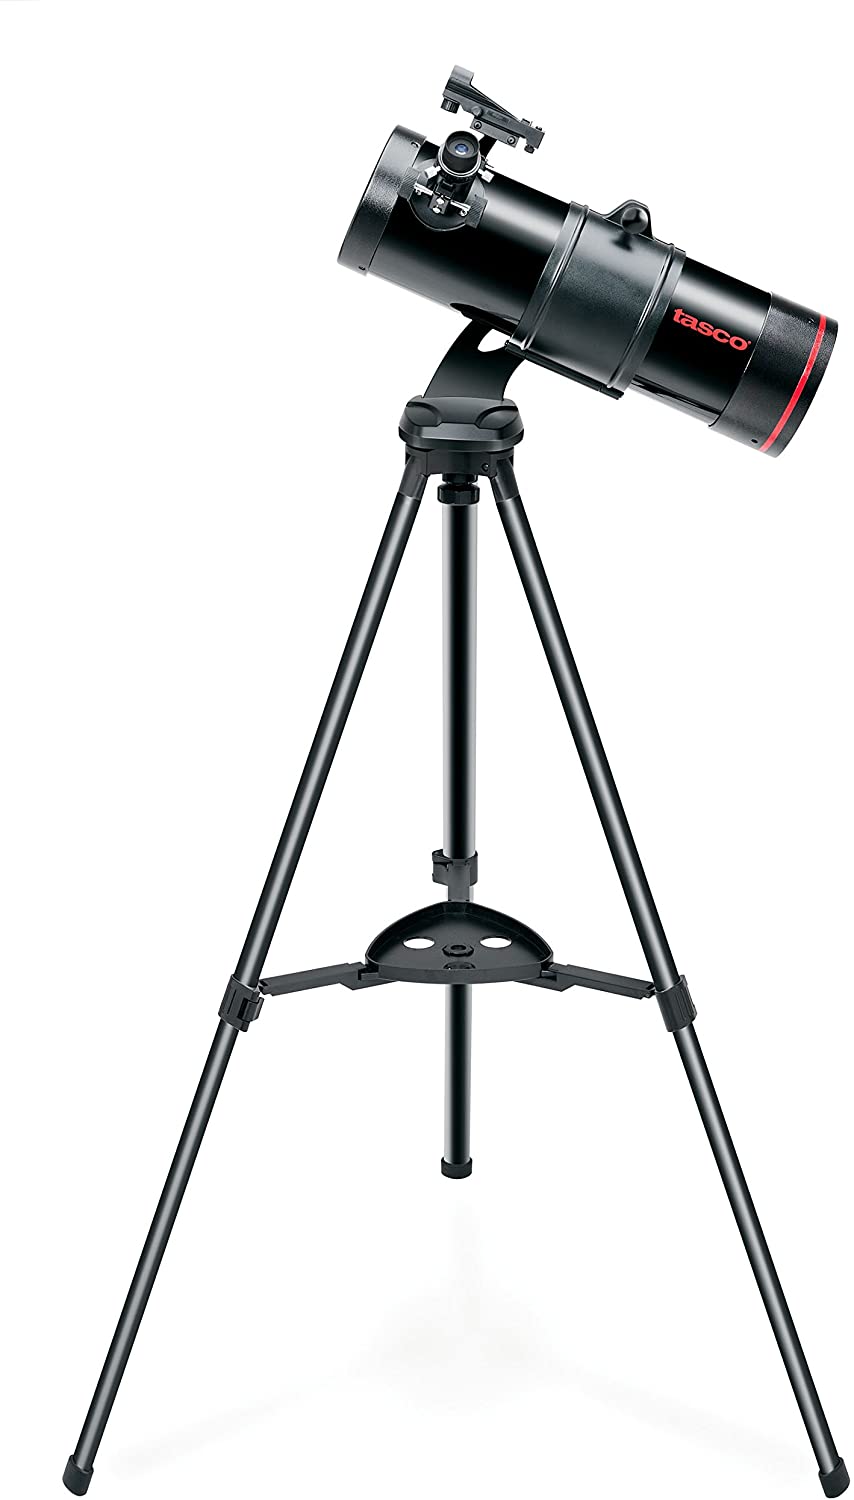 Tasco Spacestation 114x 500mm Reflector ST with Variable LED Red Dot Finderscope Telescope